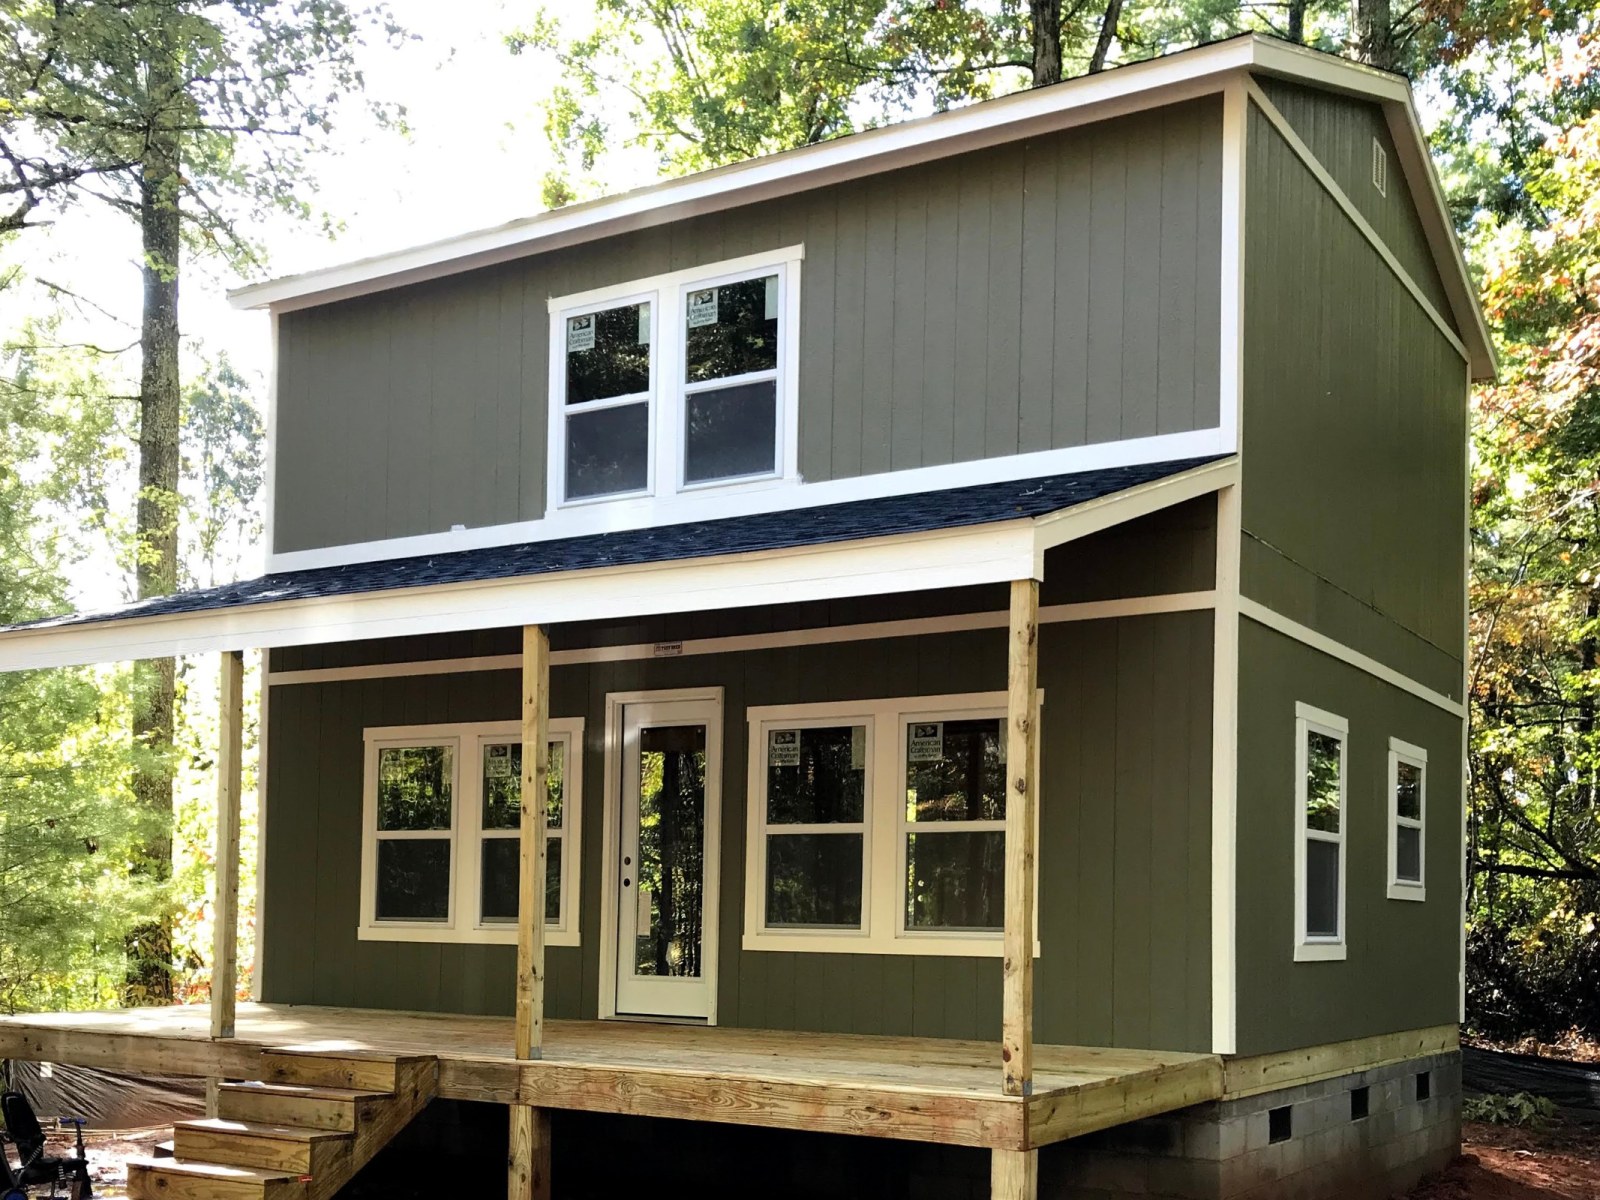 We Turned A Home Depot Shed Into A Tiny House And Sold It For $275,000'